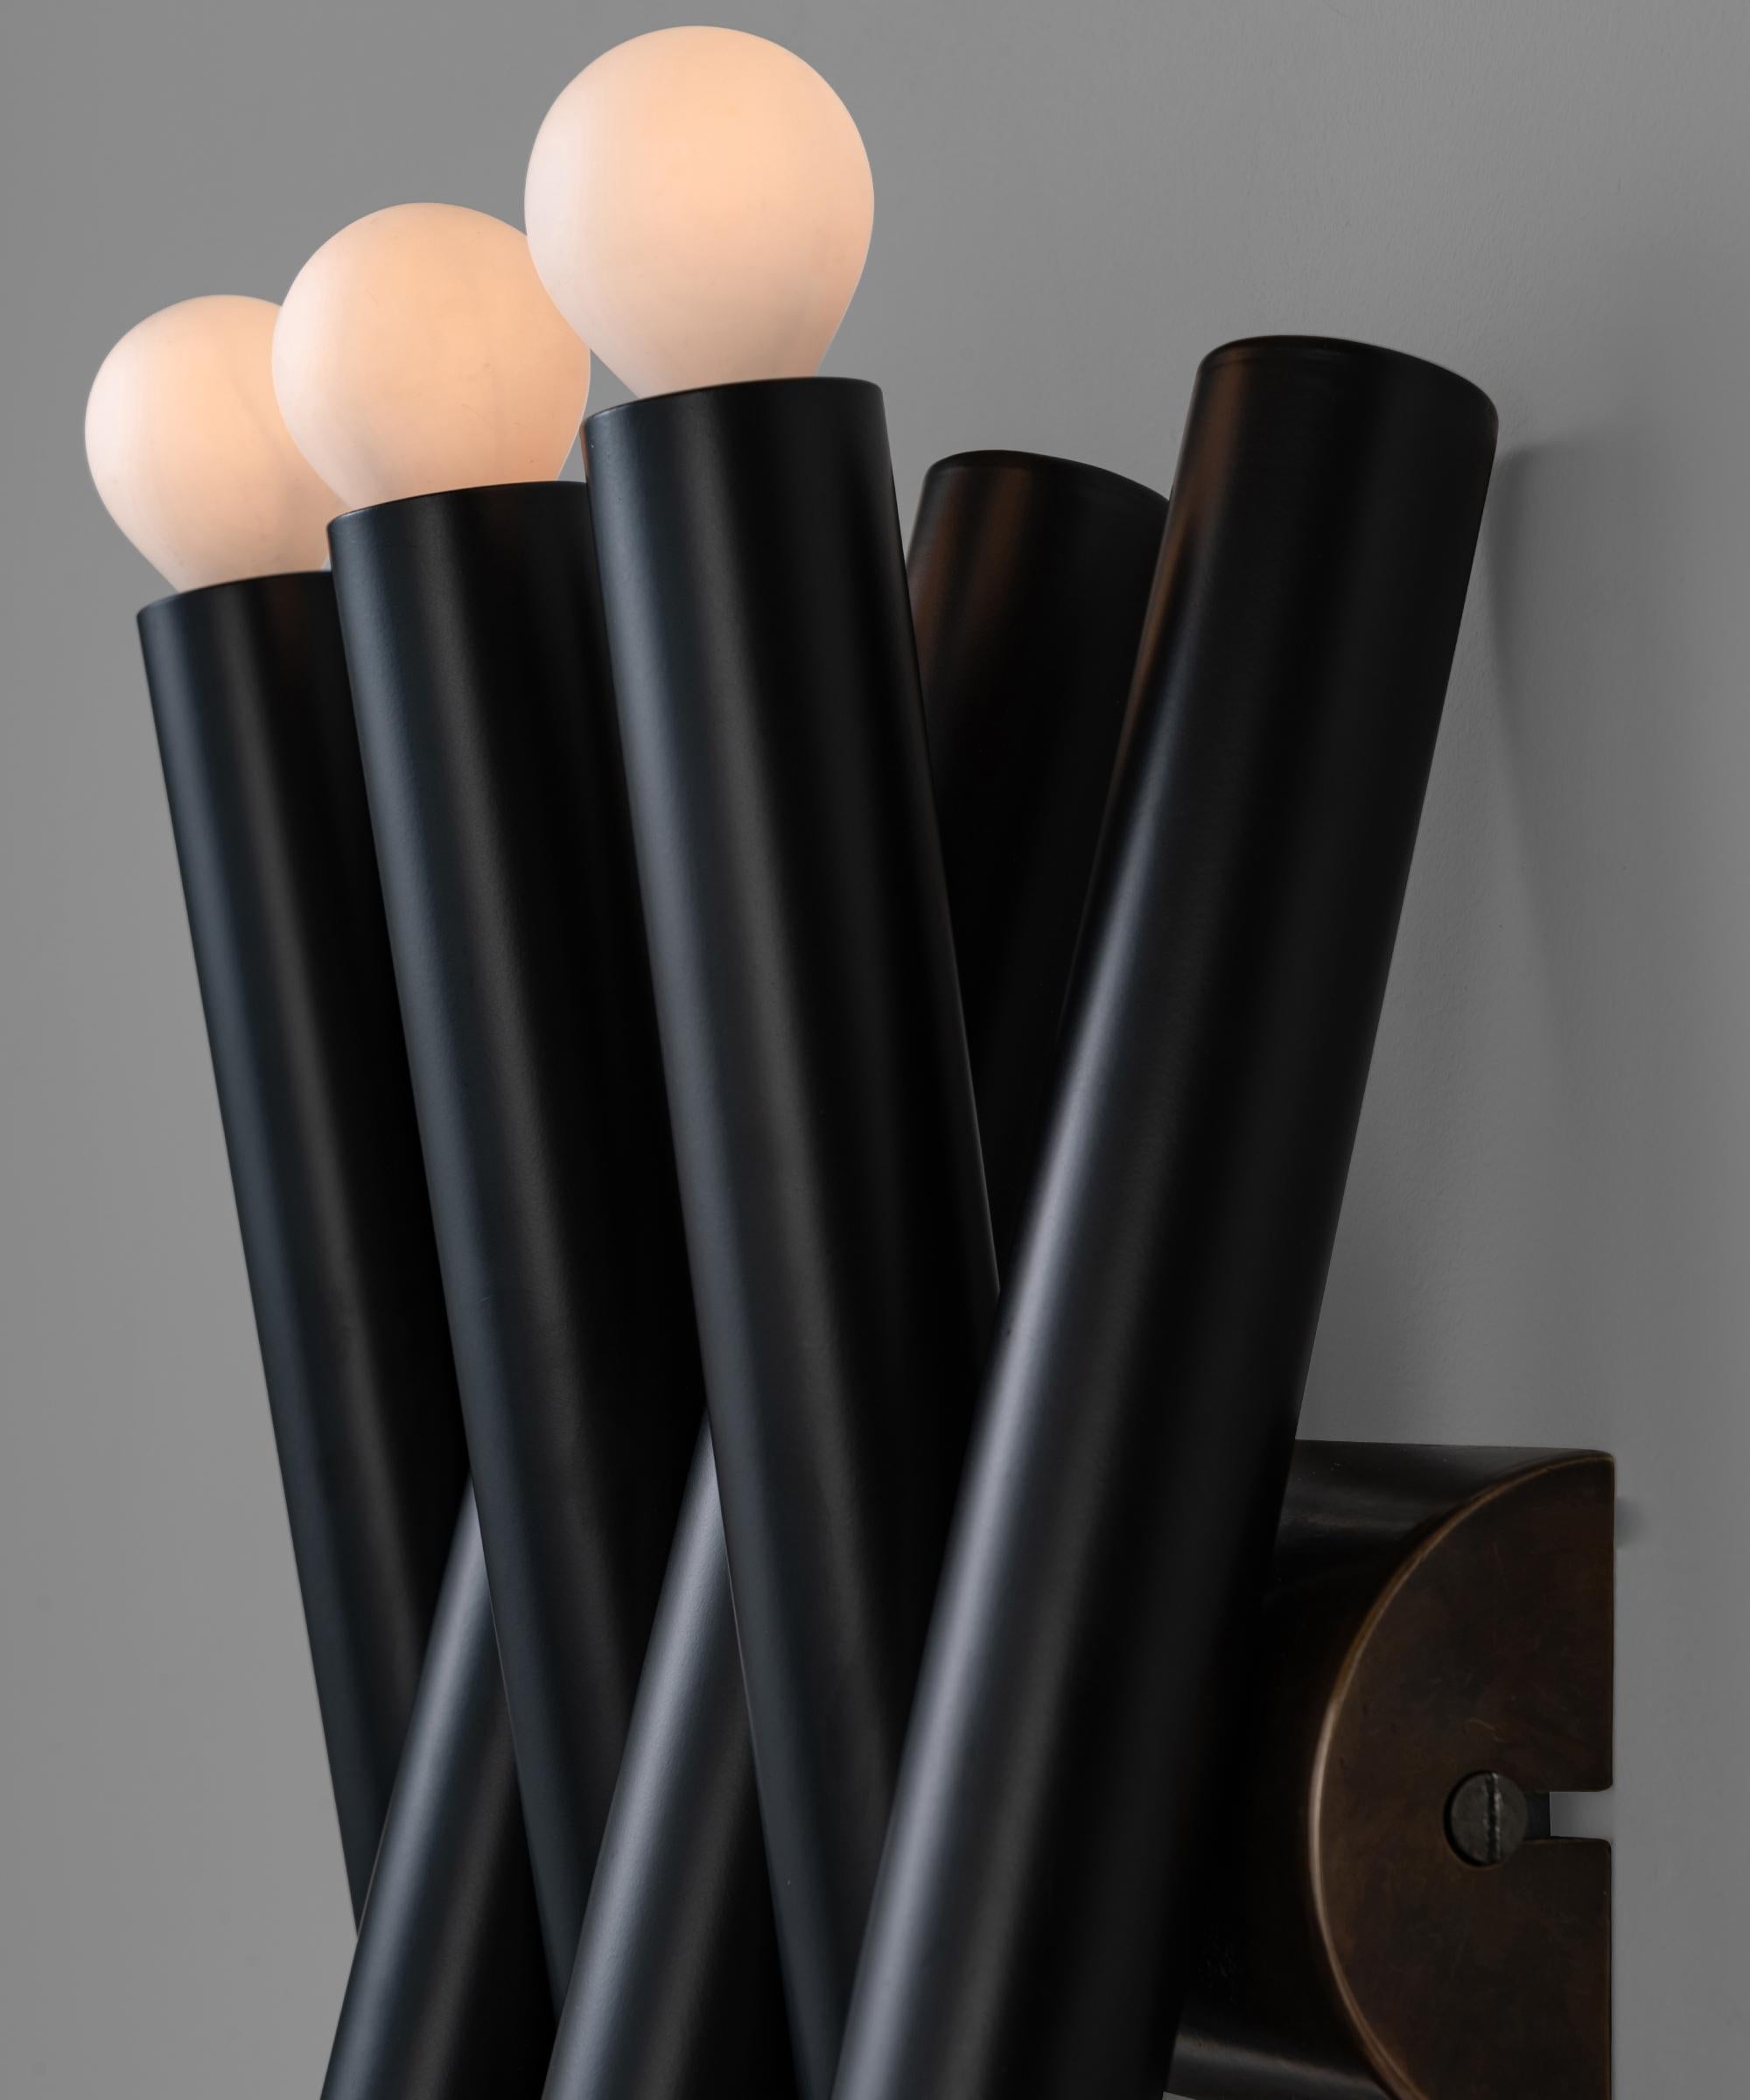 Black Metal Tubular Wall Lights, Made in Italy In New Condition For Sale In Culver City, CA